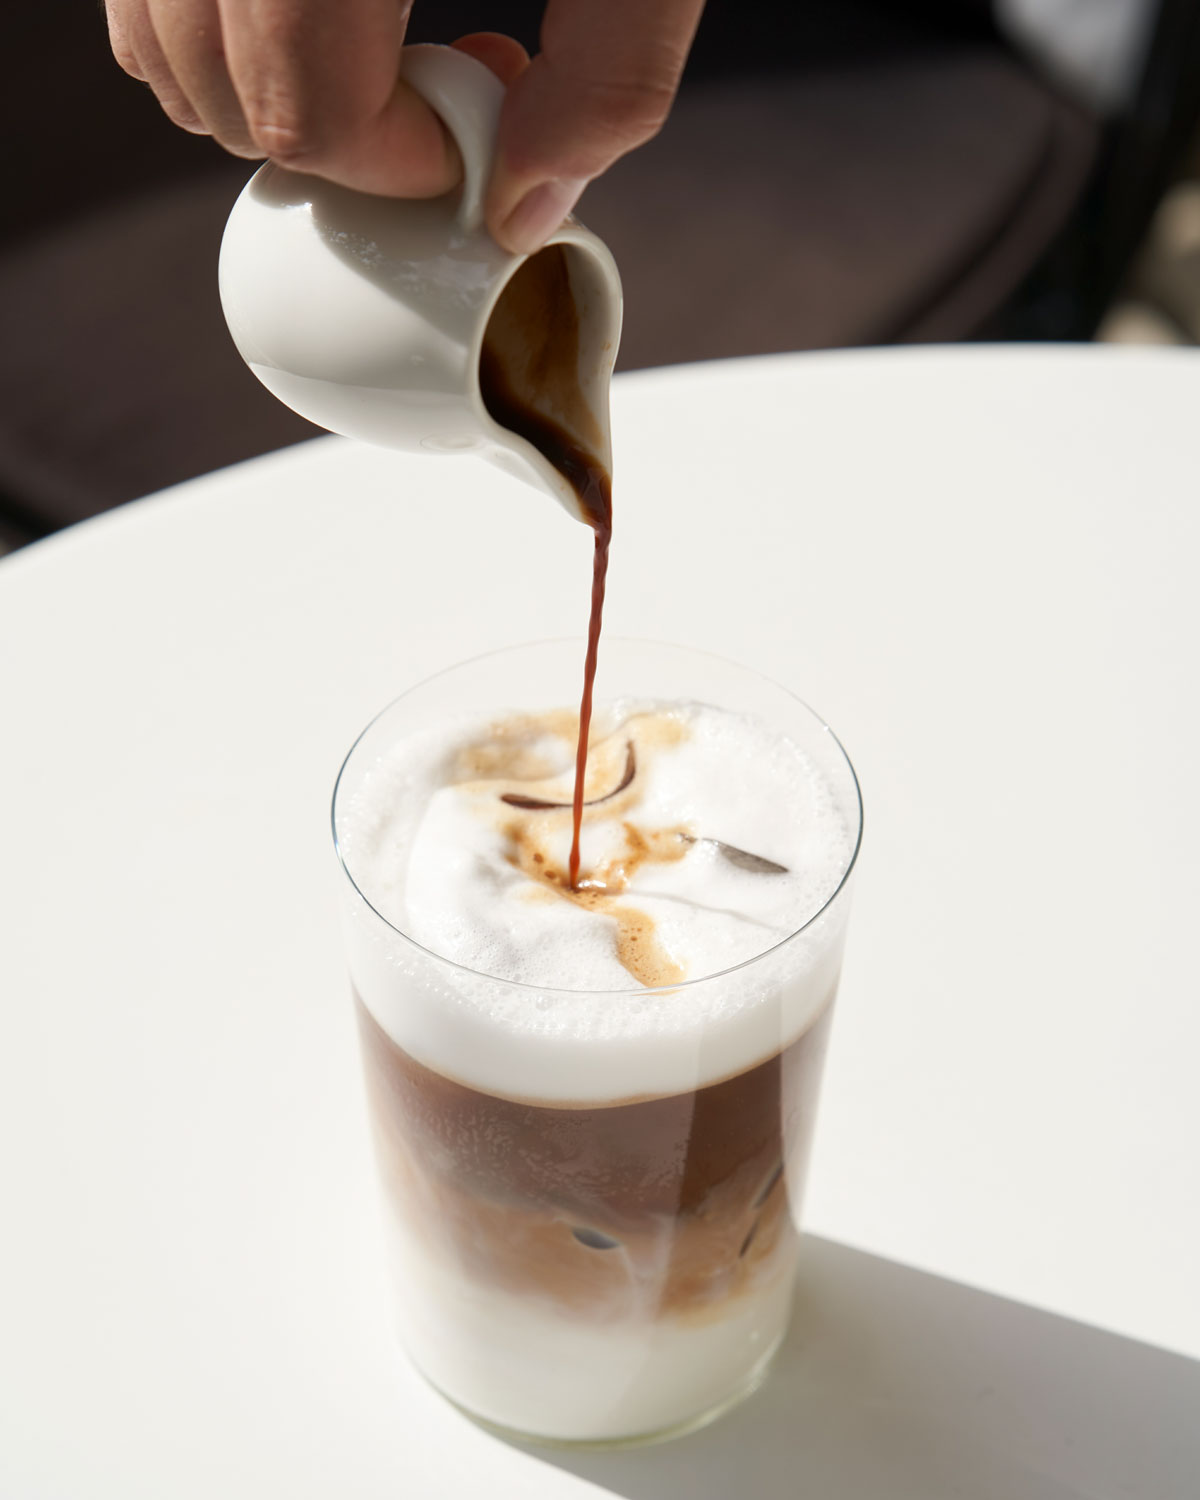 Iced Cappuccino Vs Iced Latte – What Are the Differences?